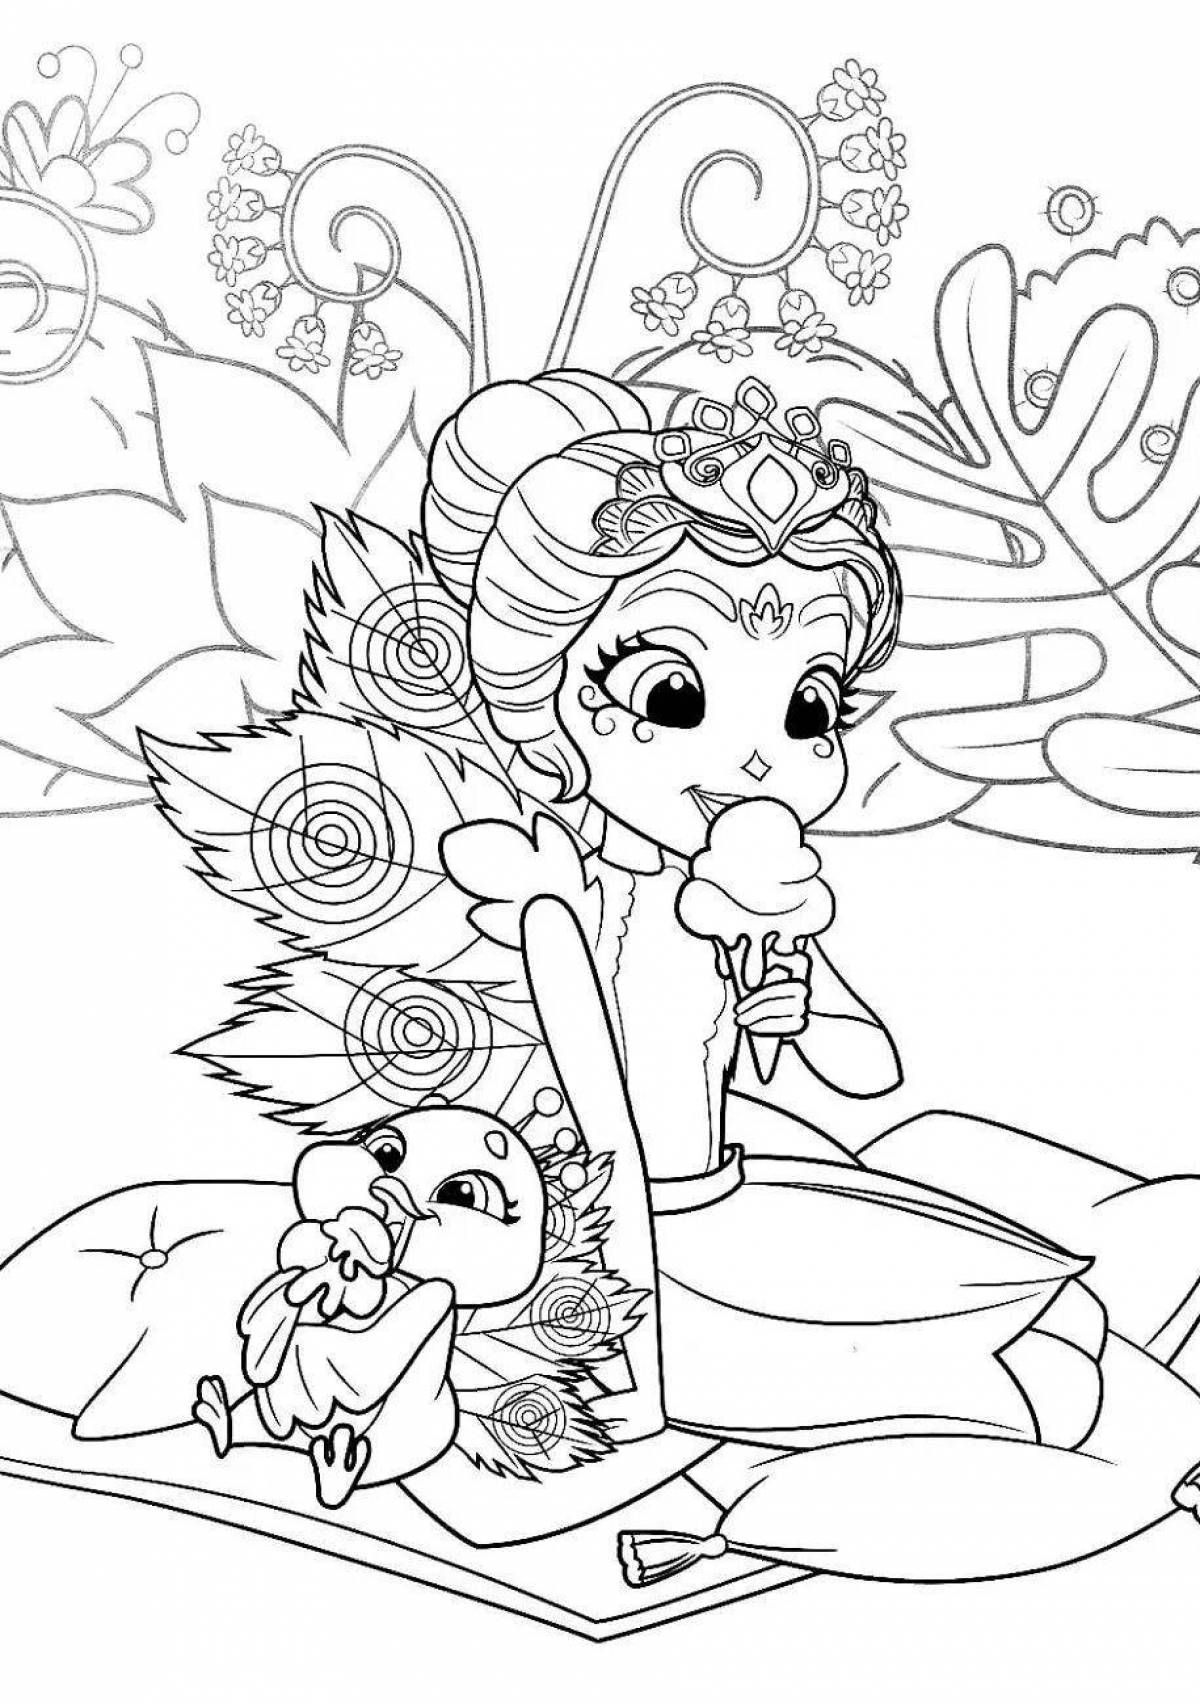 Playful incantimuls coloring page